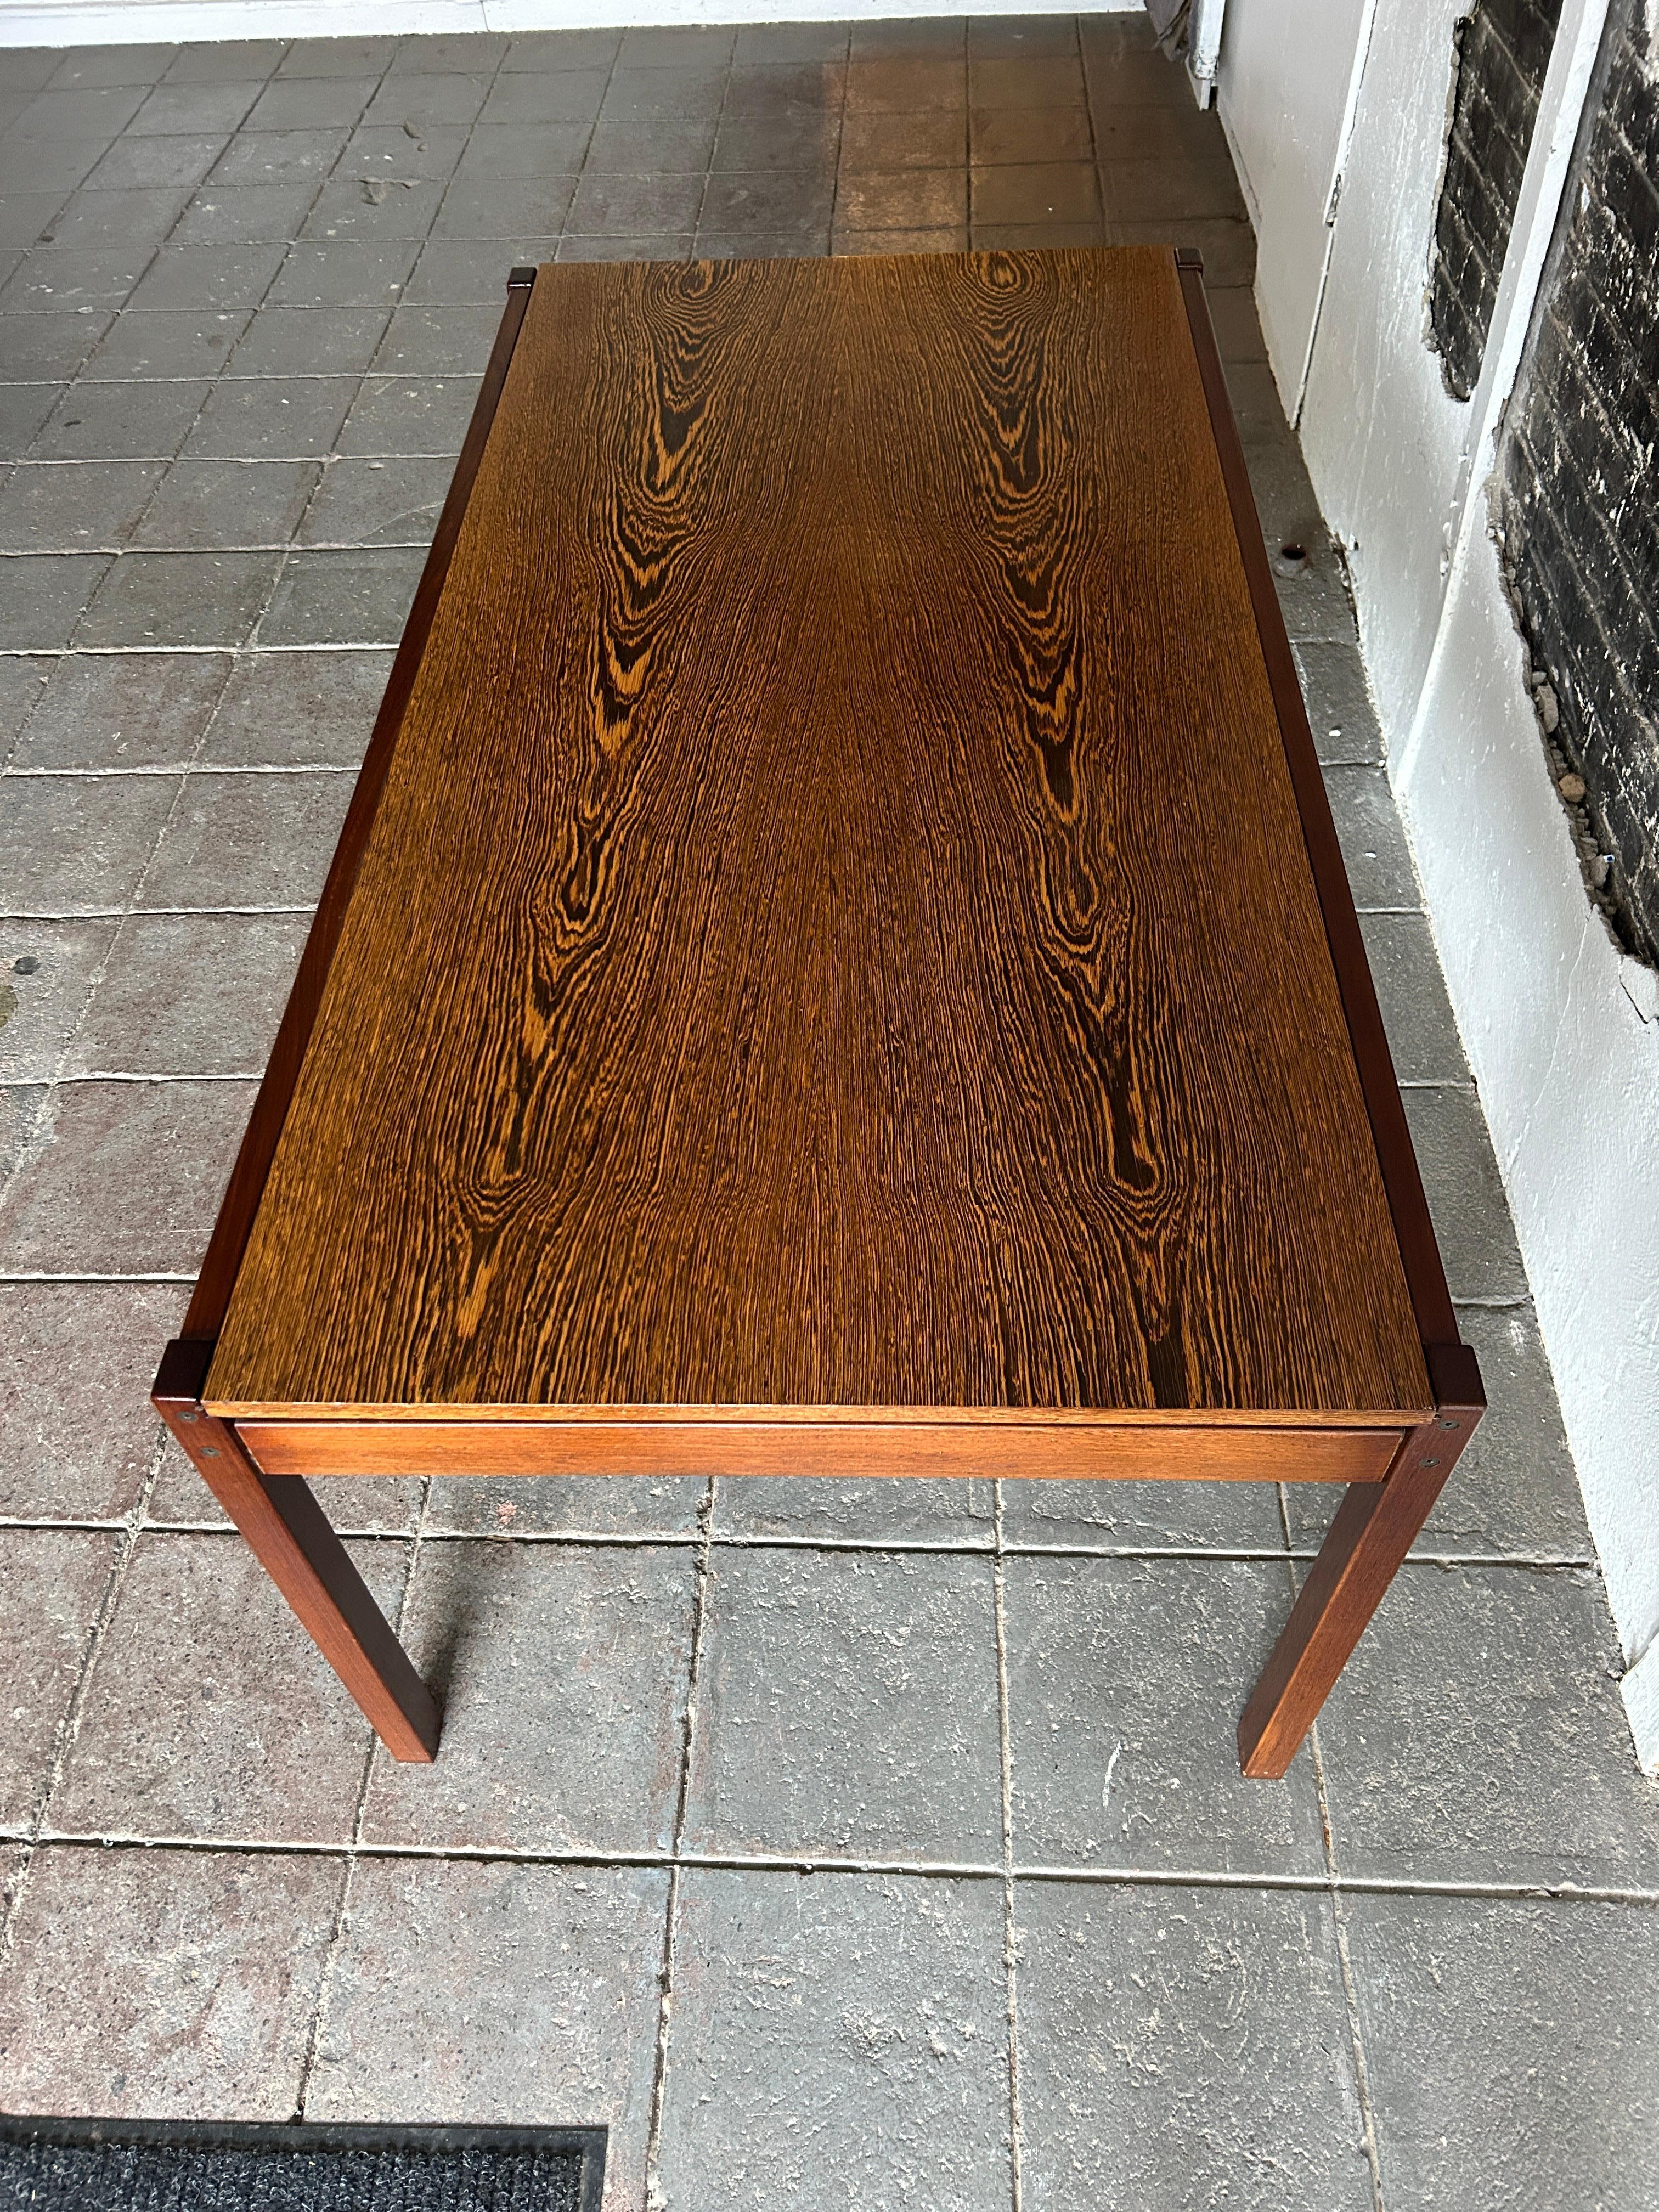 Minimalist Brazilian Modern Exotic hardwood minimalist extension dining table In Good Condition For Sale In BROOKLYN, NY